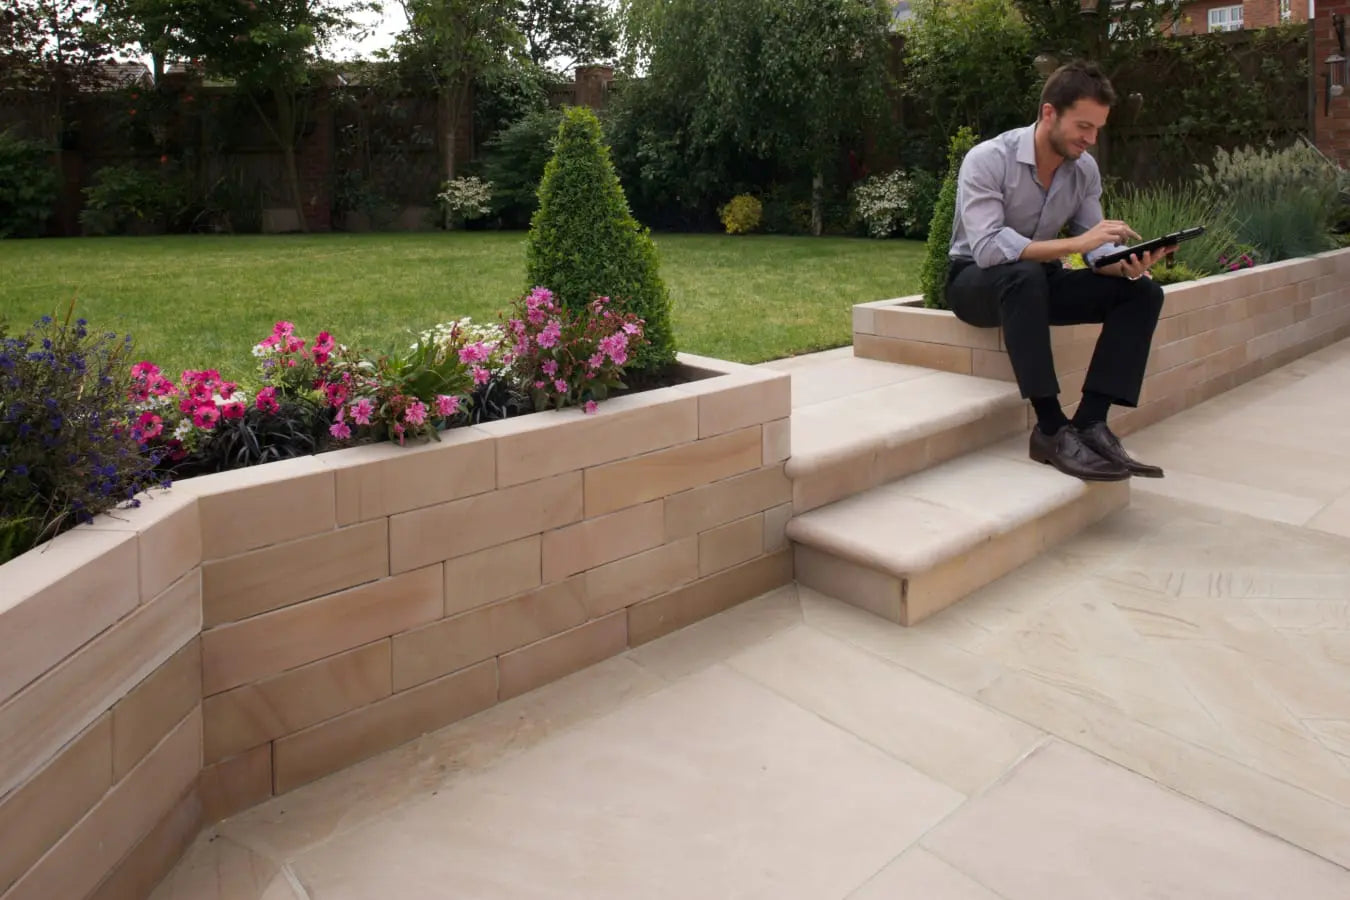 Fairstone Sawn Walling by Marshalls - Project Pack Marshalls